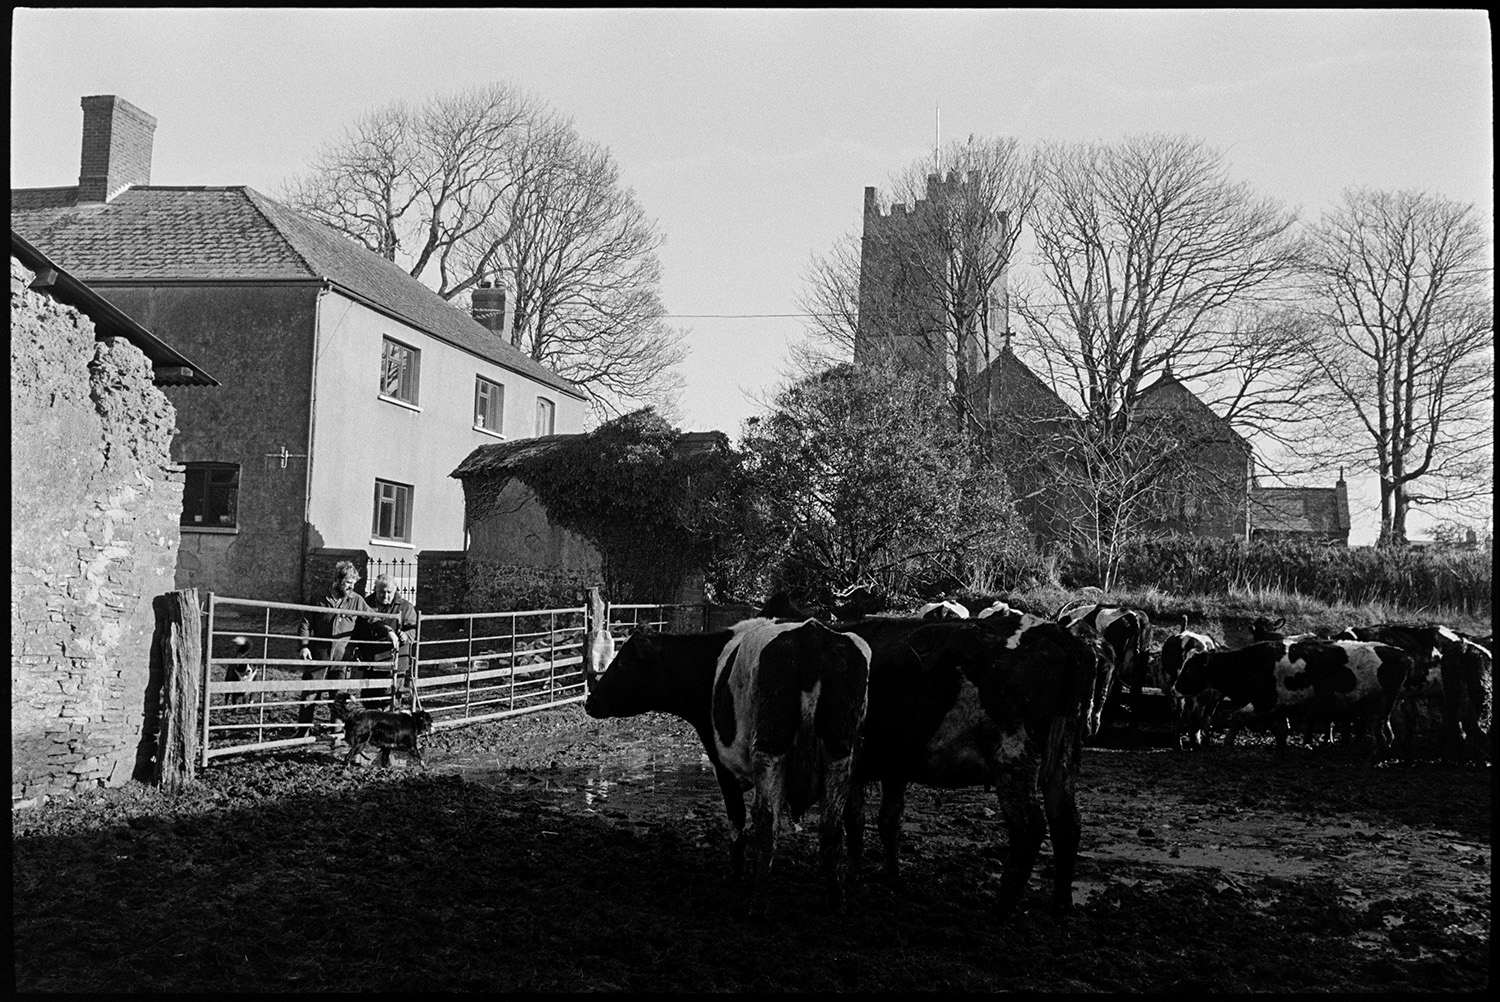 Farm with barns, farmer bringing in cows to feed calves through yard with muckheaps, manure.
[Two men and two dogs standing next to a metal gate in front of a herd of cattle, in the farmyard at The Barton, Burrington. The farmhouse and Holy Trinity Church are visible in the background.]